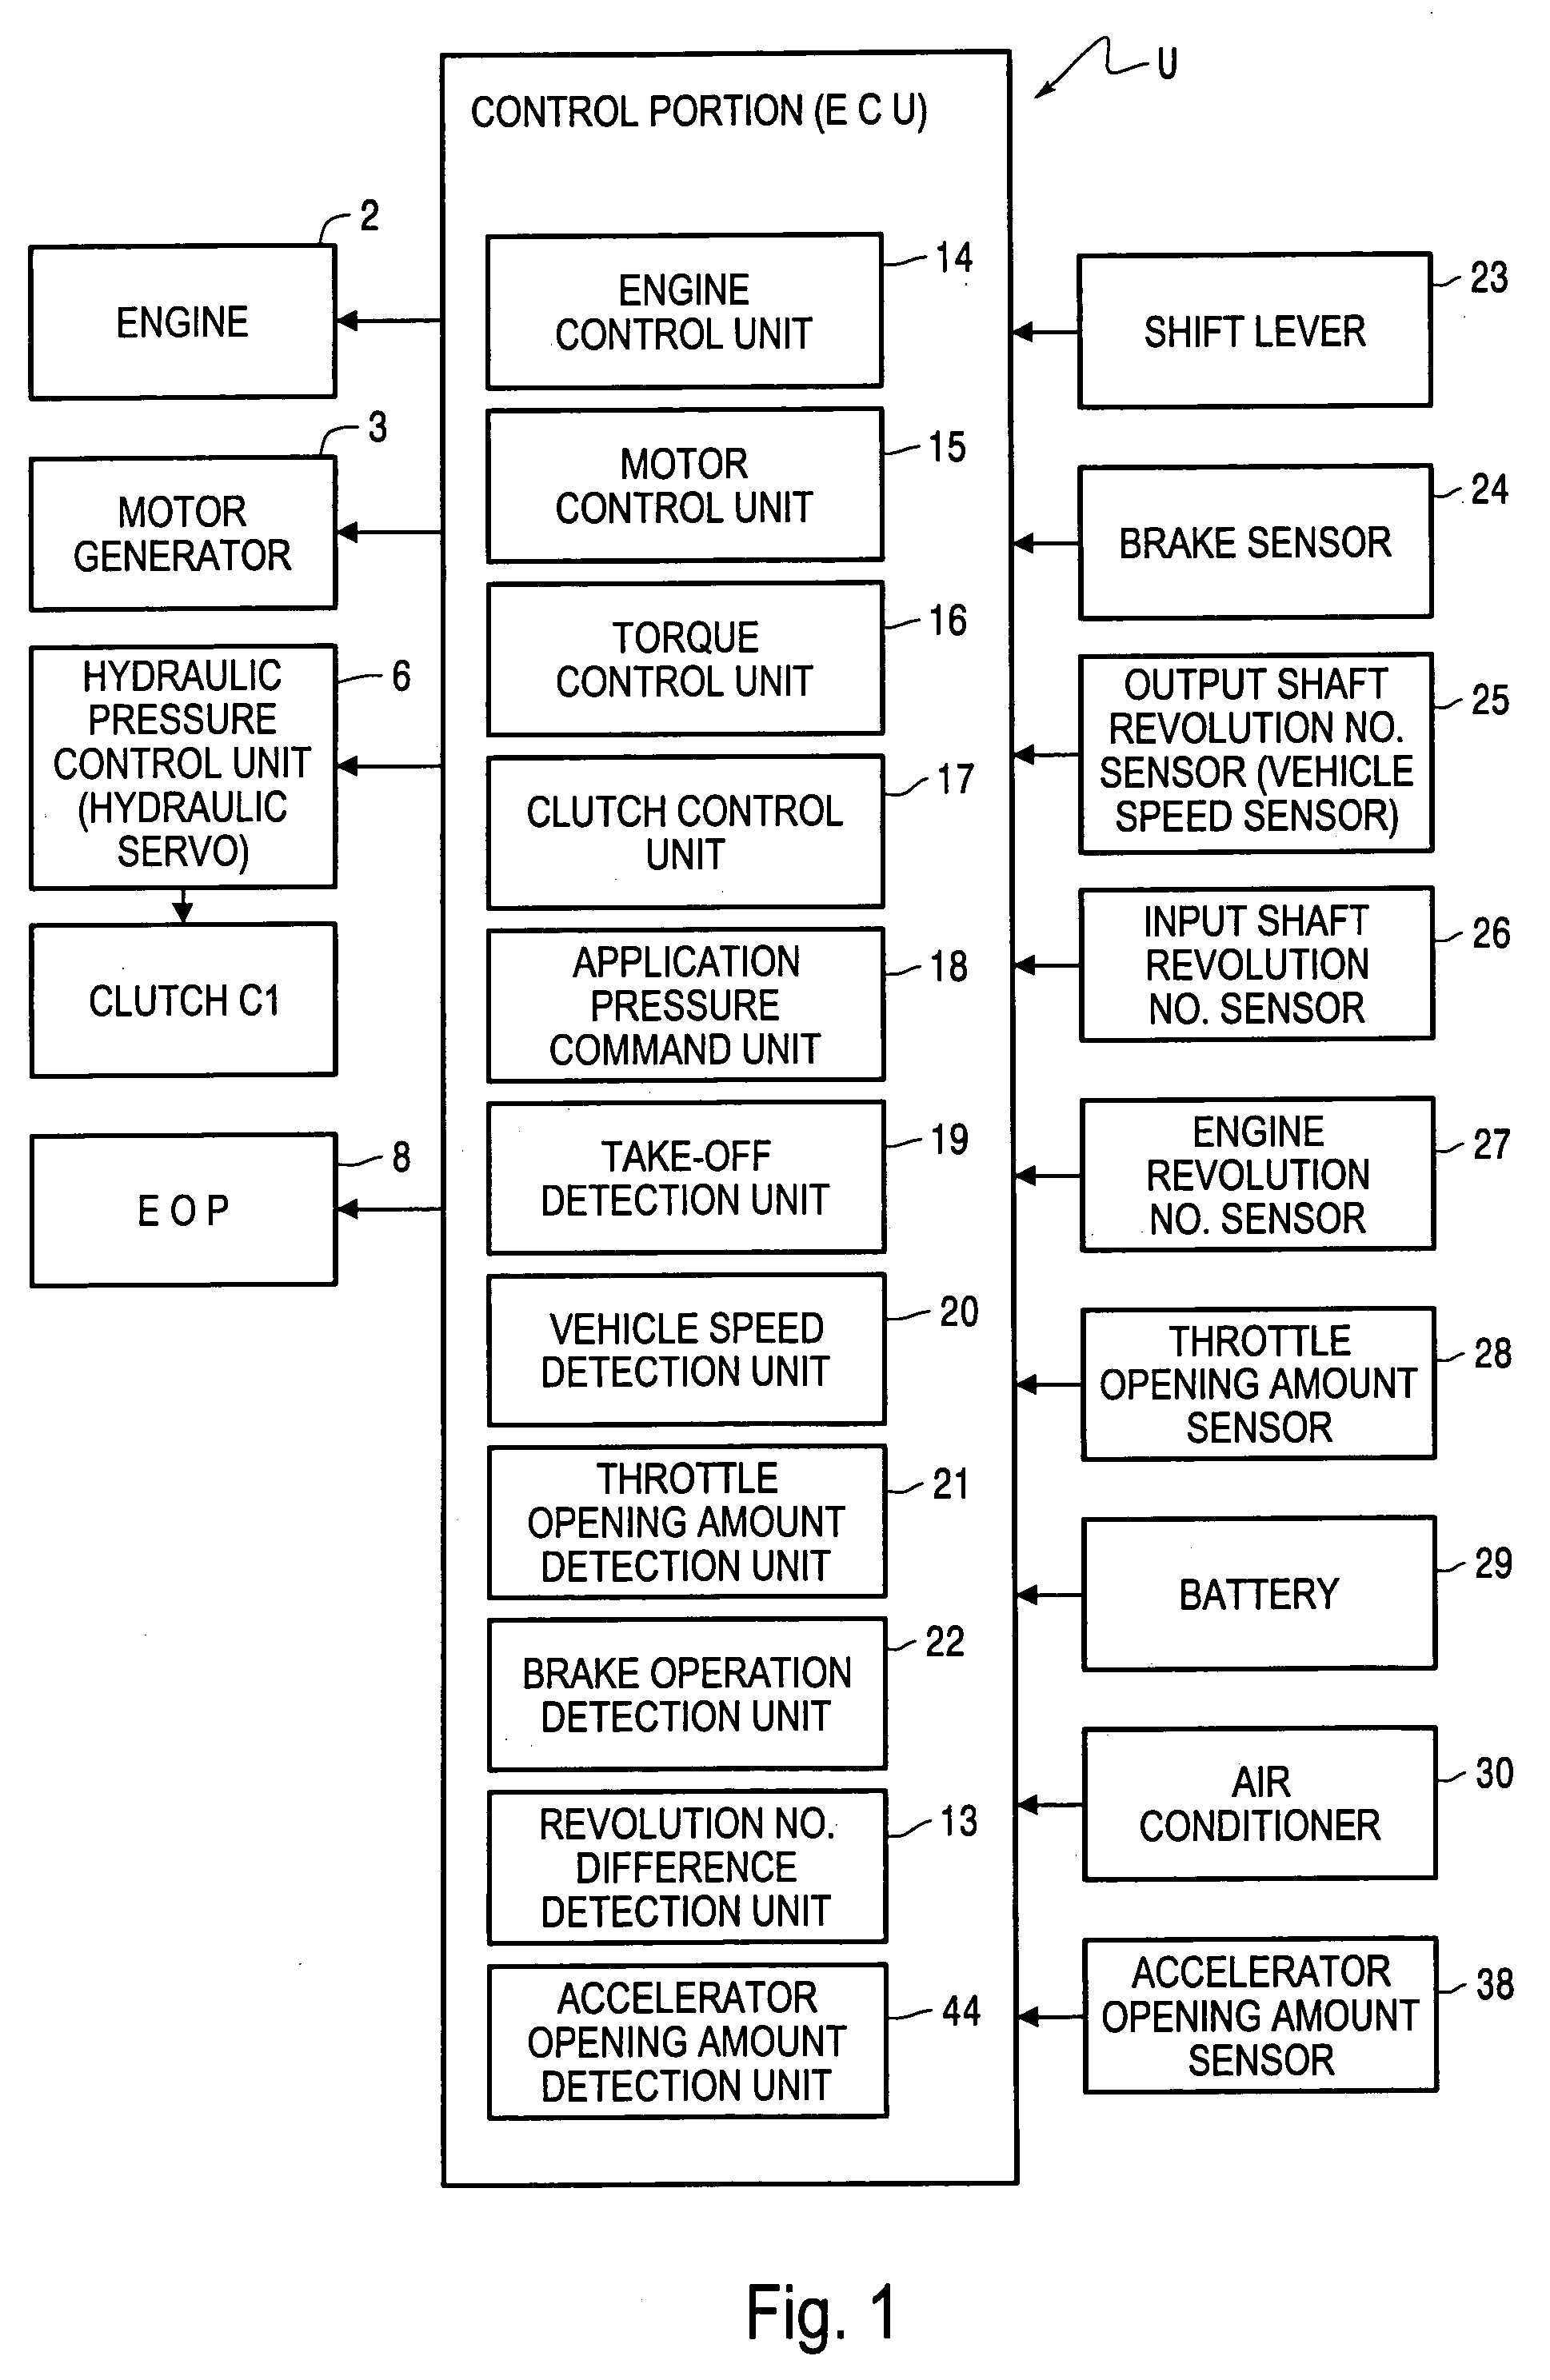 Control device for a hybrid vehicle